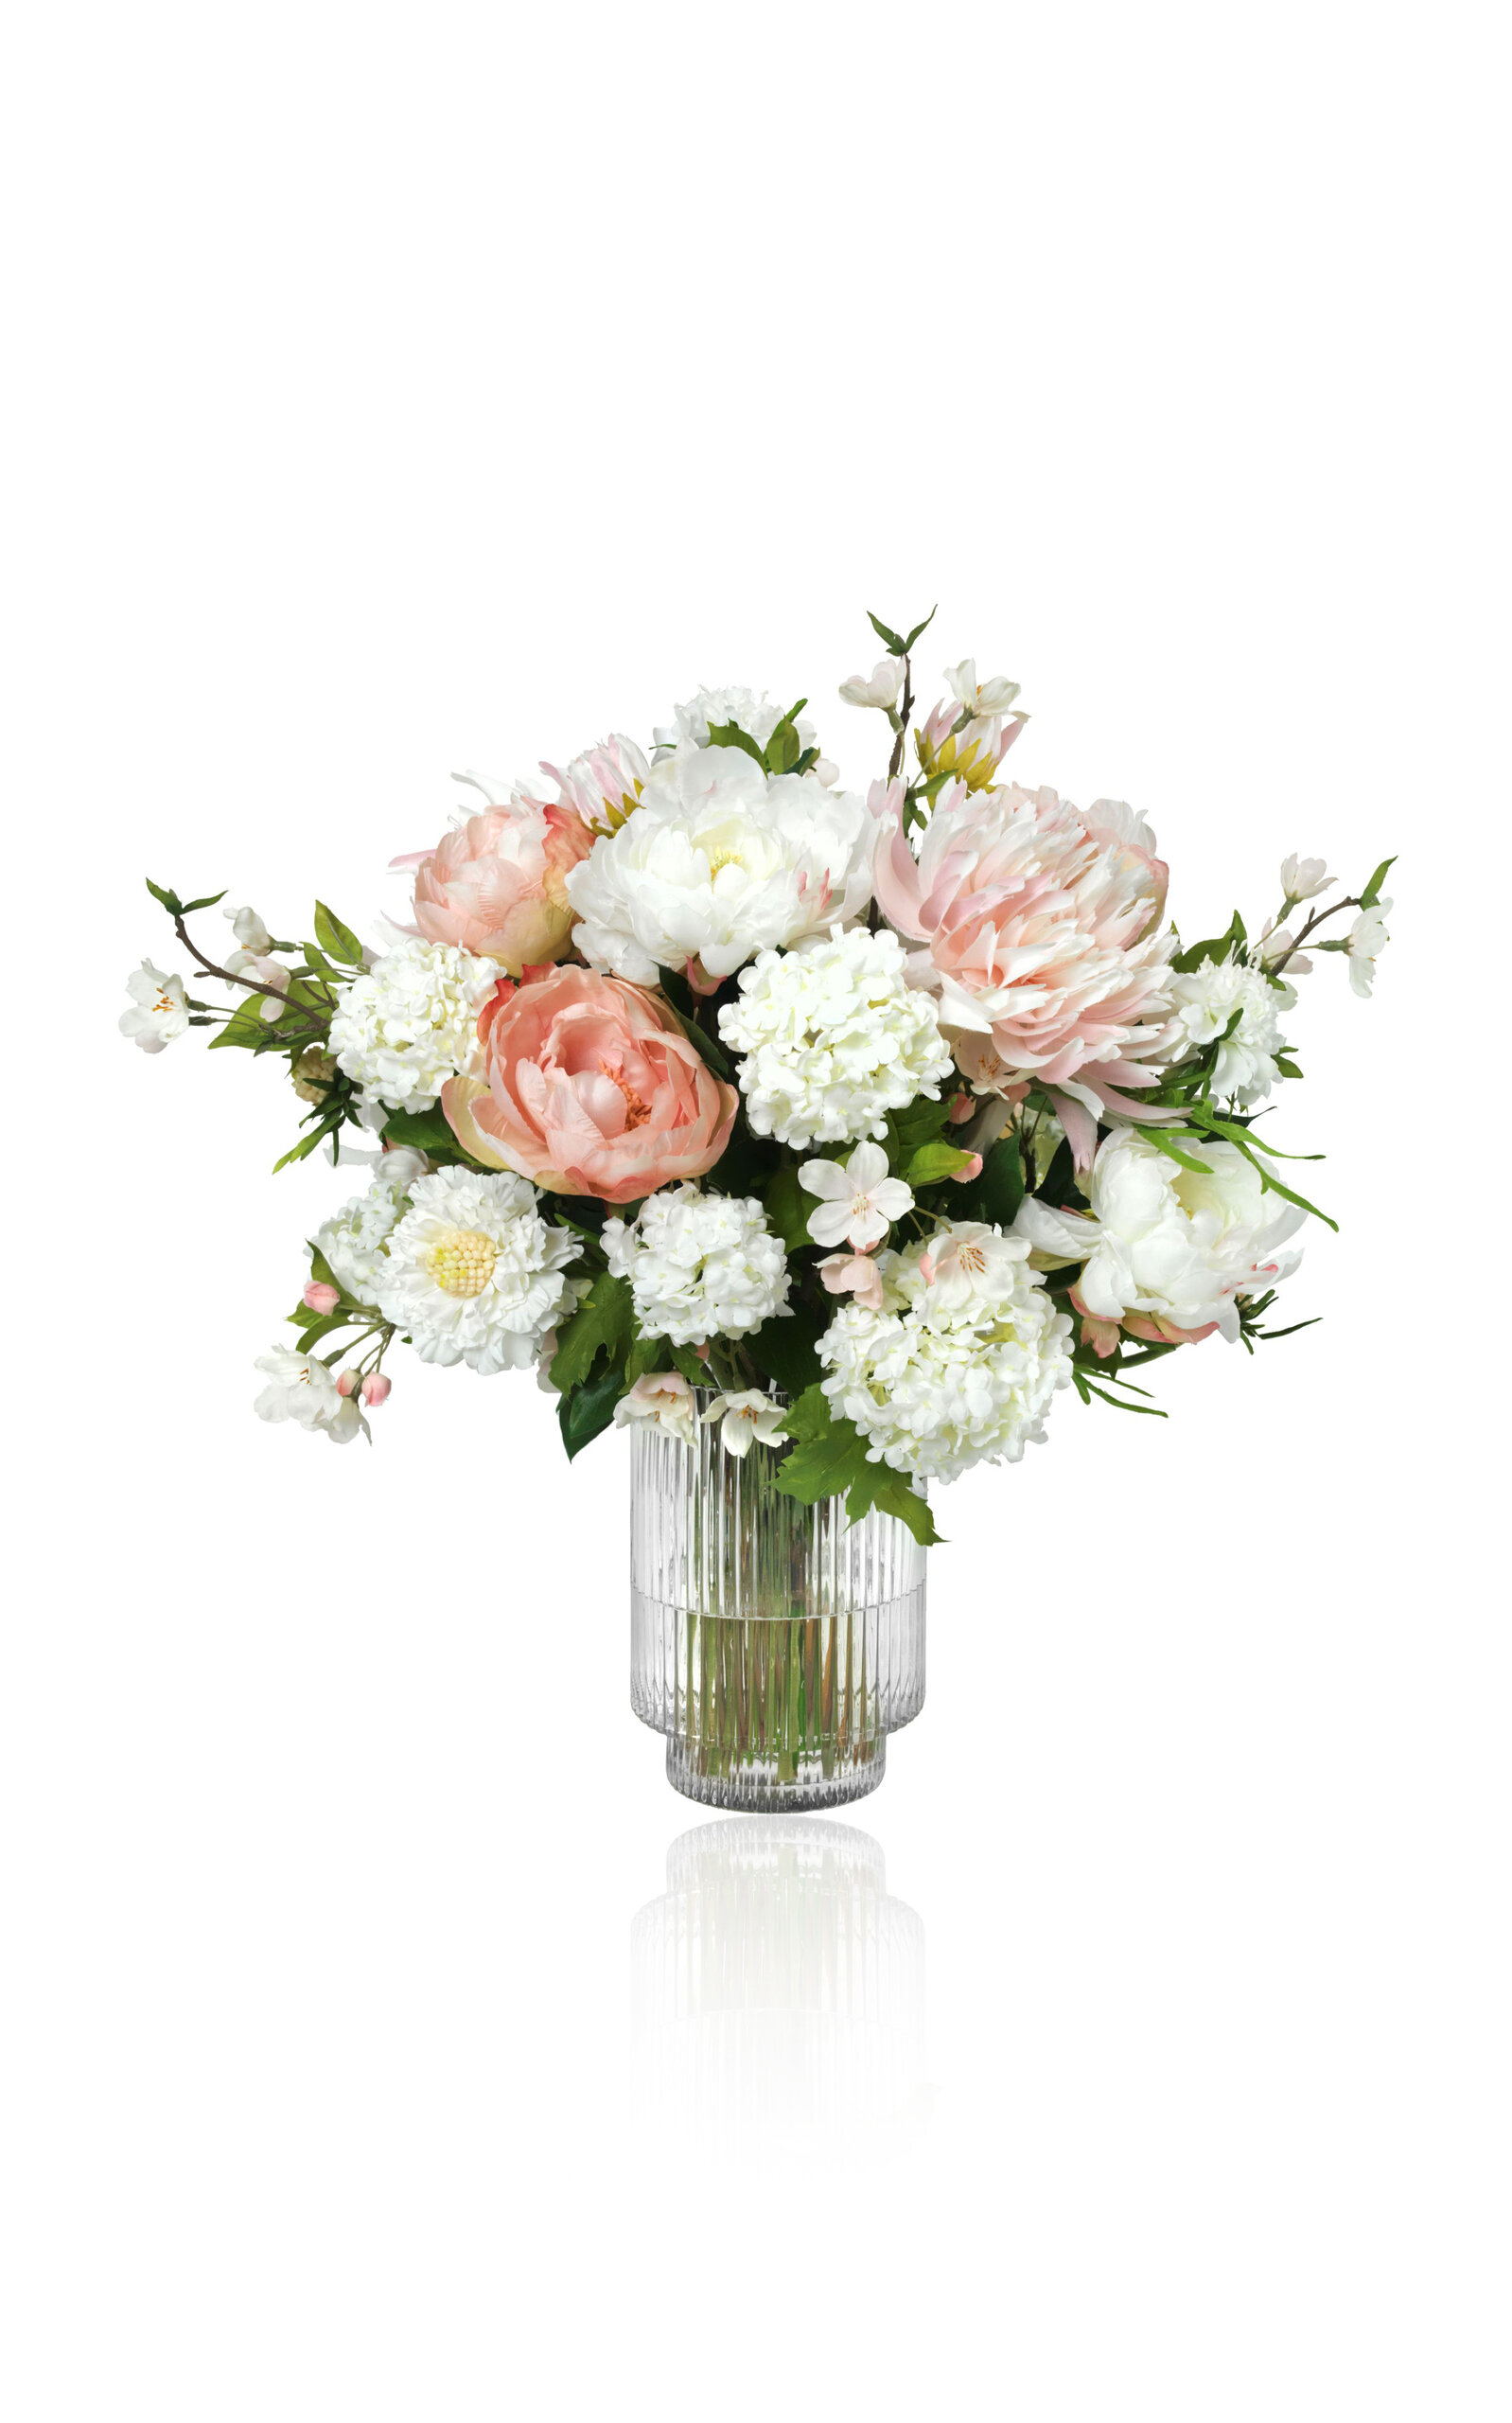 Shop Diane James Designs Peonies; Dahlias And Pear Blossom In Ribbed Vase In Light Pink